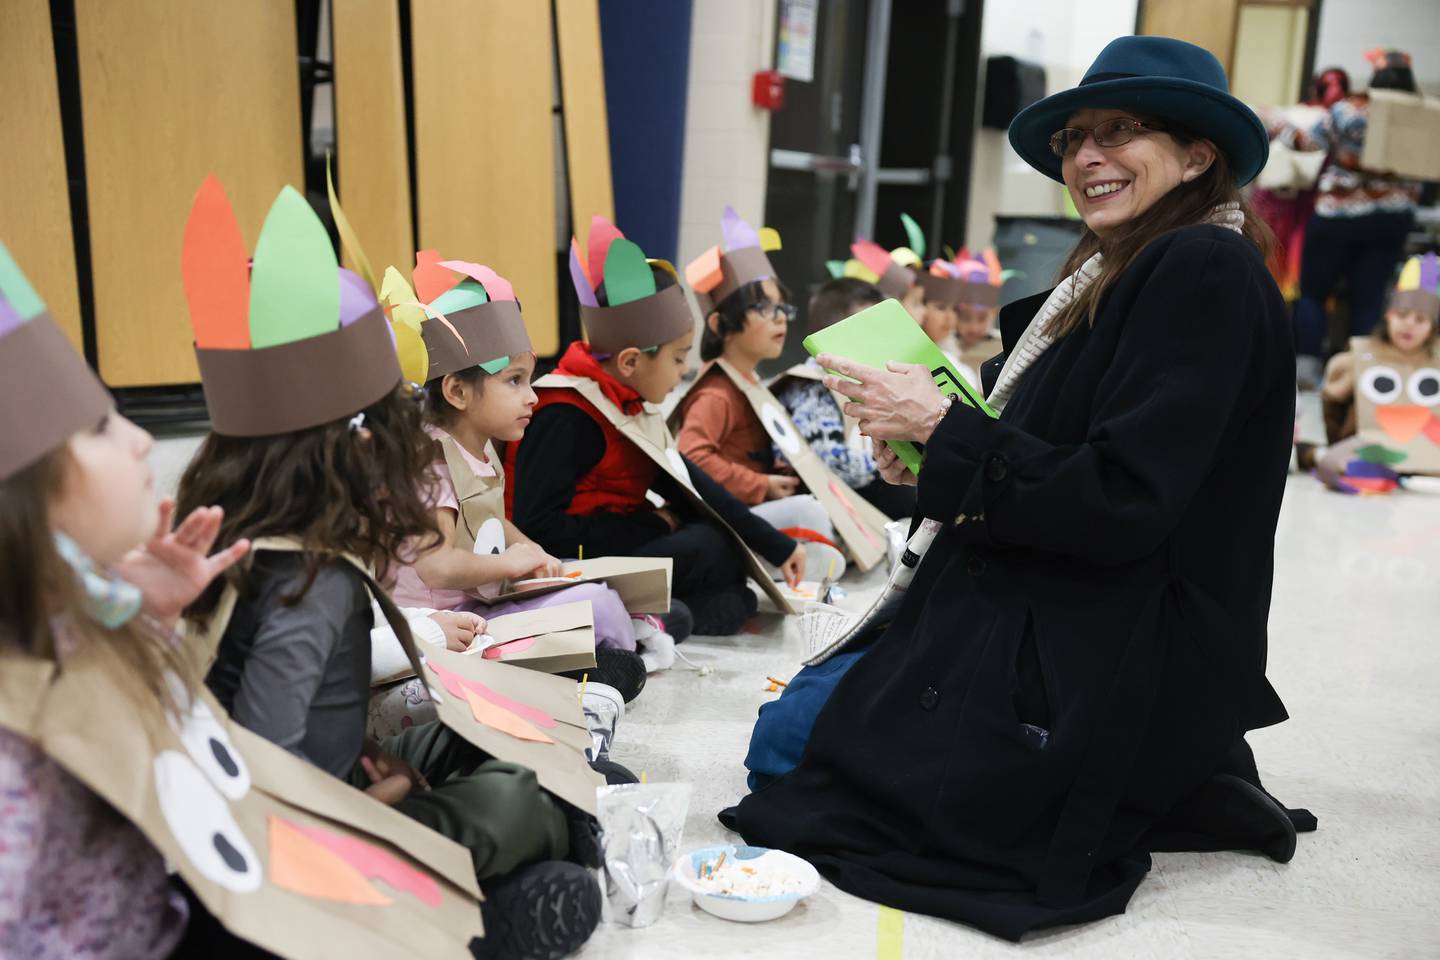 Herald-News Denise Unland talks with students during a Thanksgiving gathering at Thomas Jefferson Elementary School in Joliet on Friday.